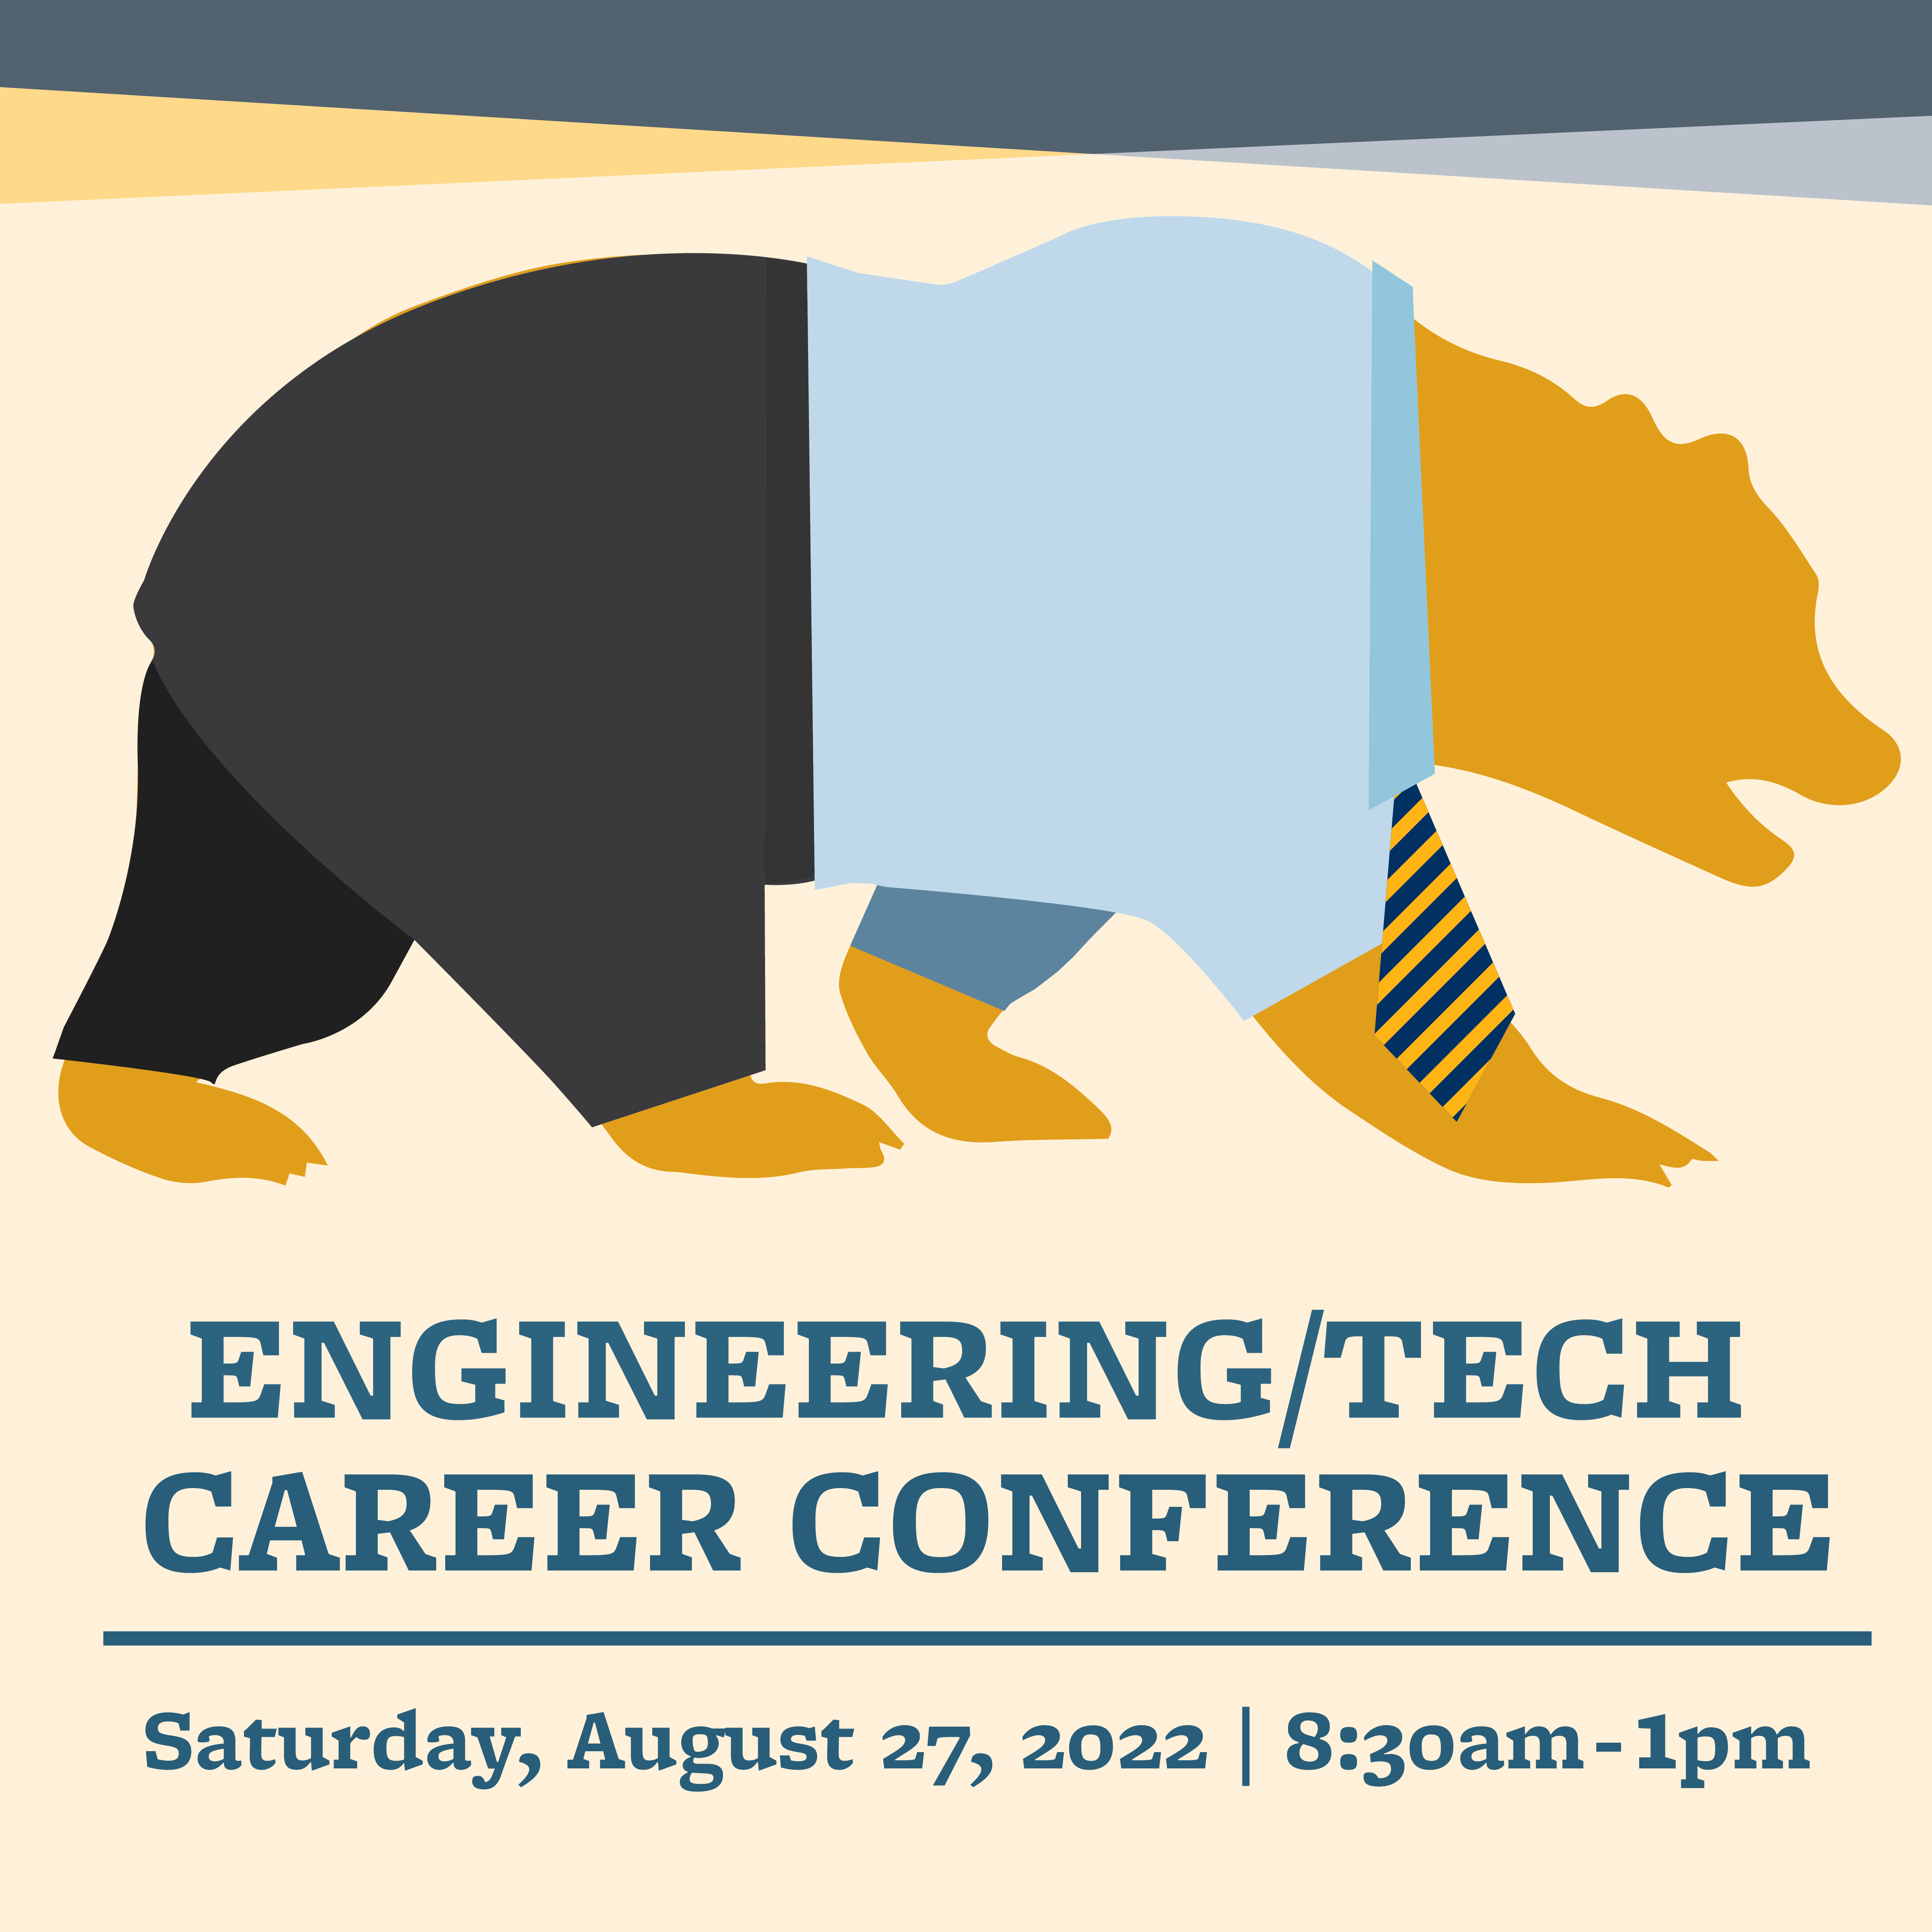 Engineering/Tech Career Conference